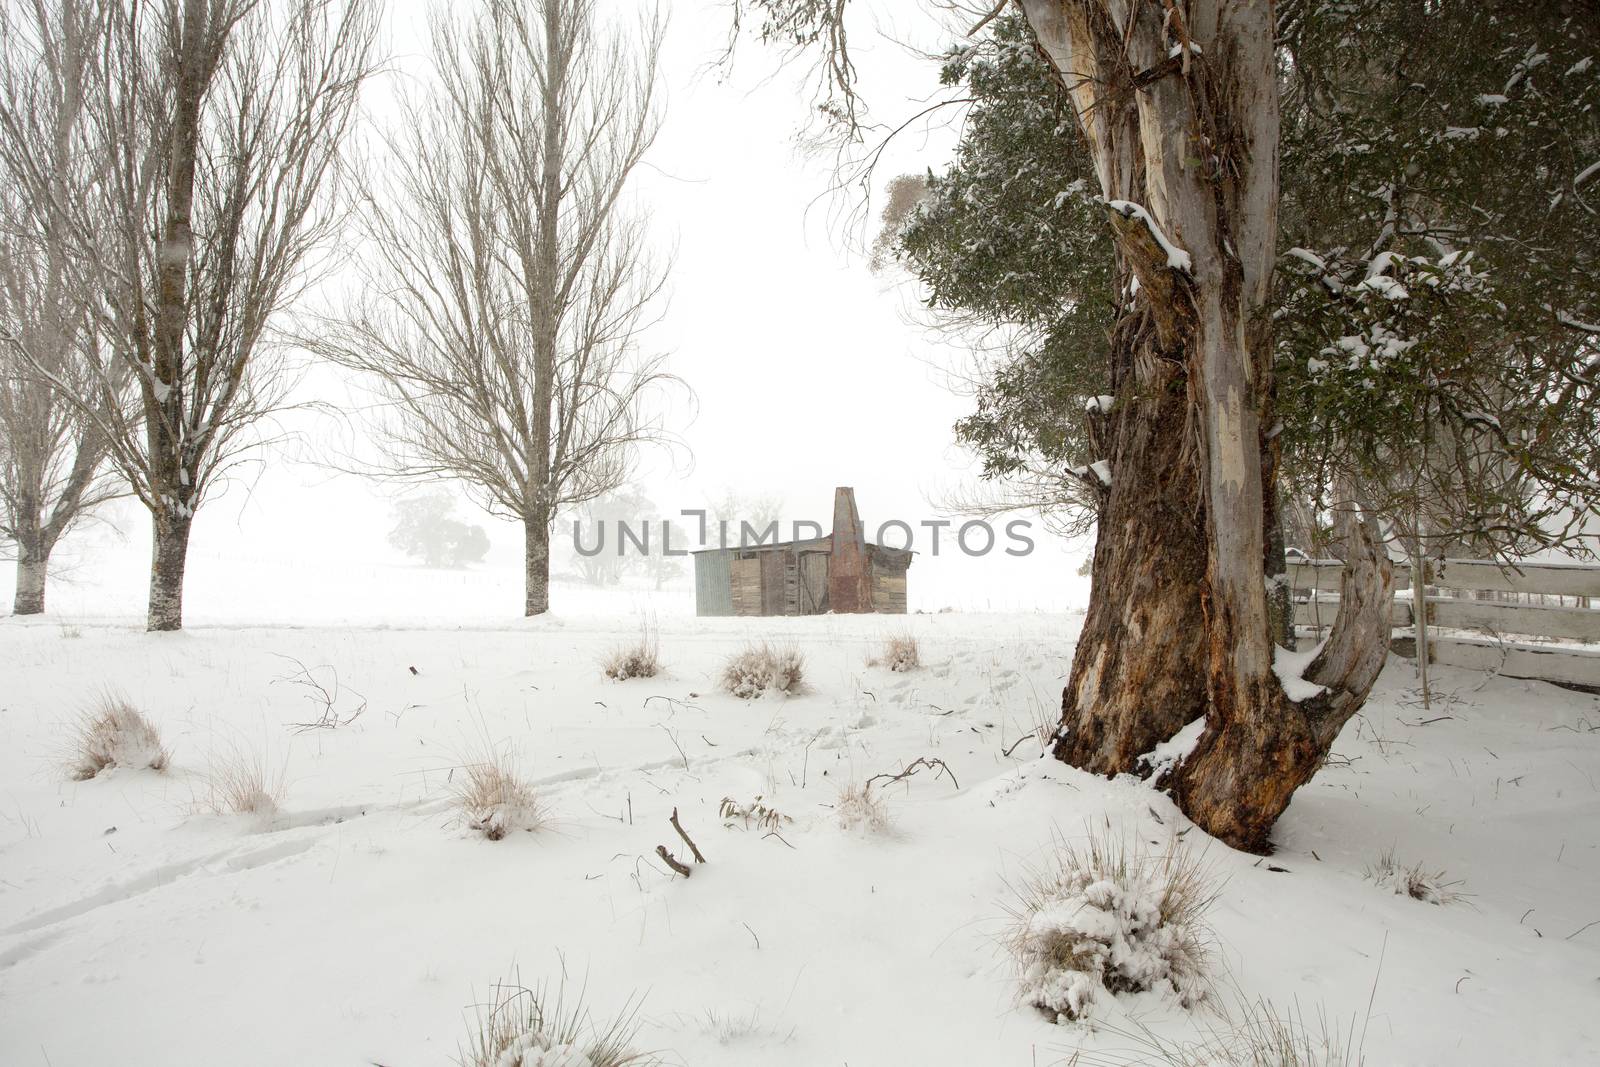 Winter wonderland with fields covered in snow, as snow falls, trees without leaves and other robust gums covered in snow.  A rustic timber shed or outbuilding in the distance